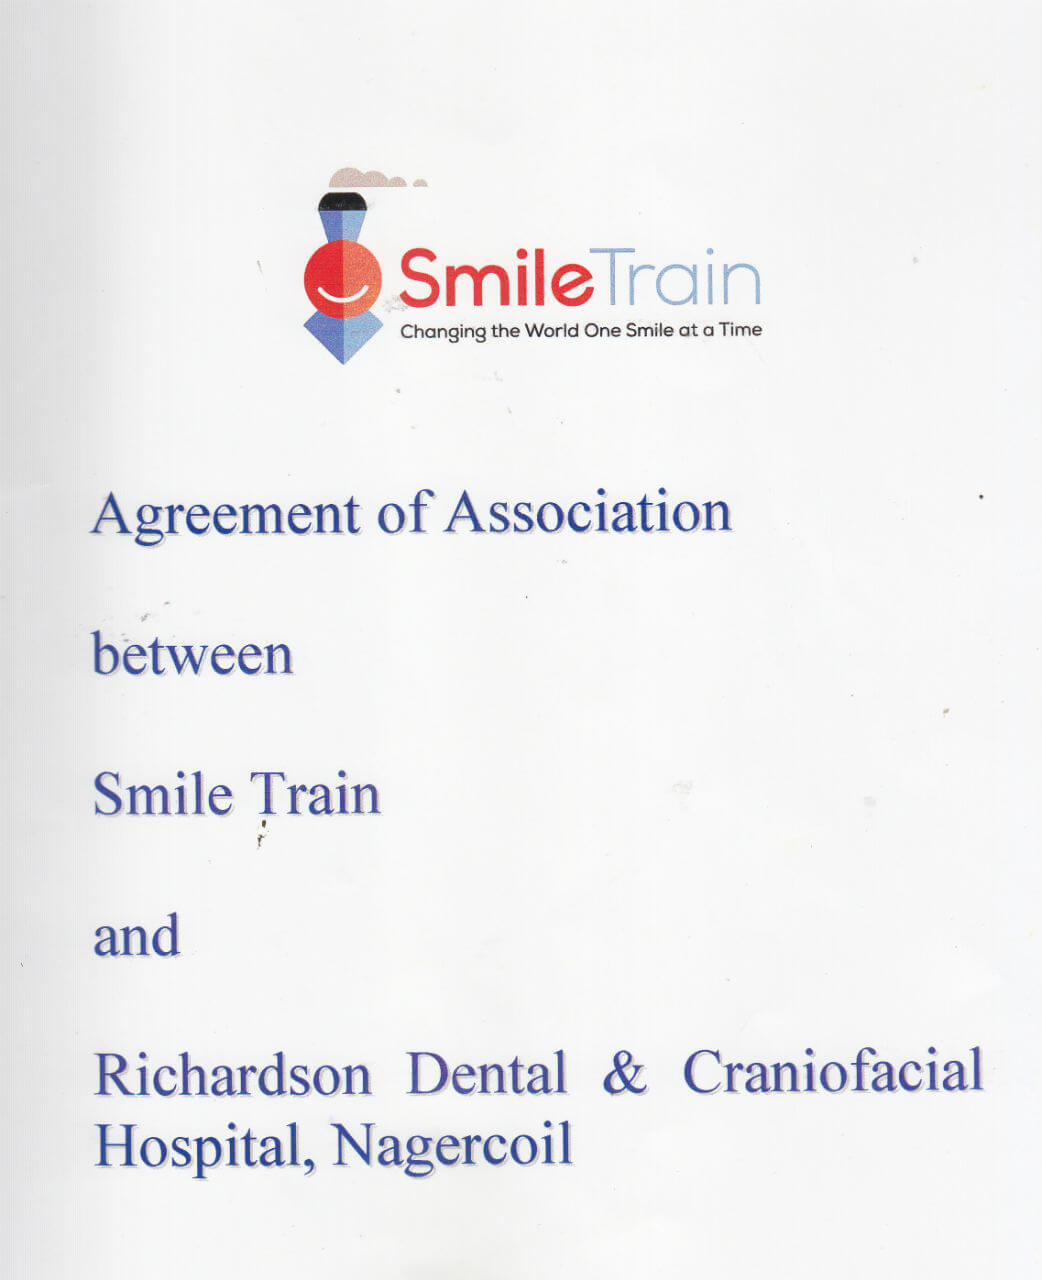 Smile Train Certificate for for Richardsons Dental and Craniofacial Hospital